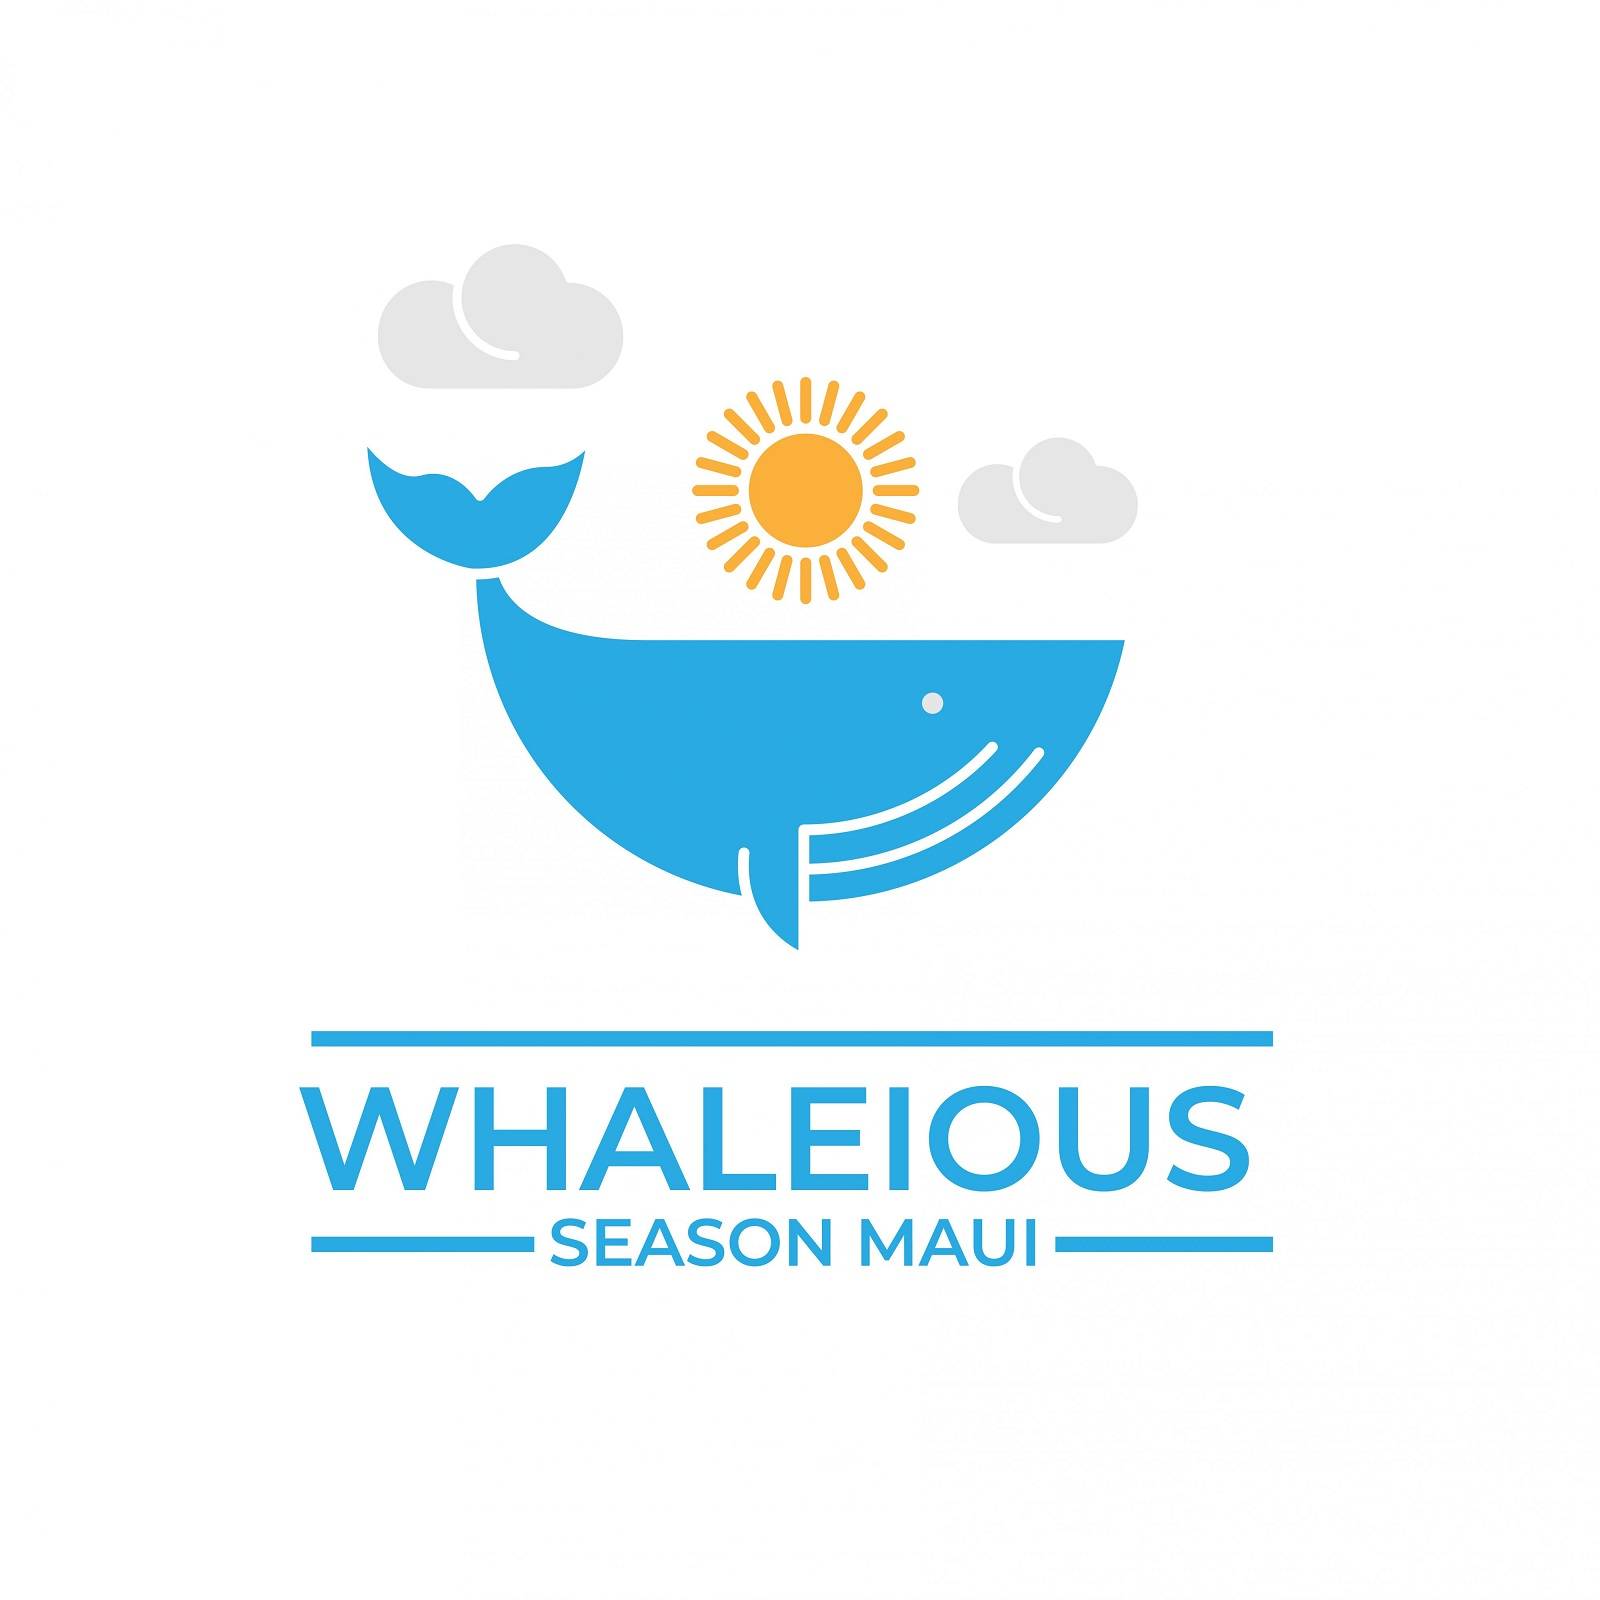 Whale logo with sun and cloud designs